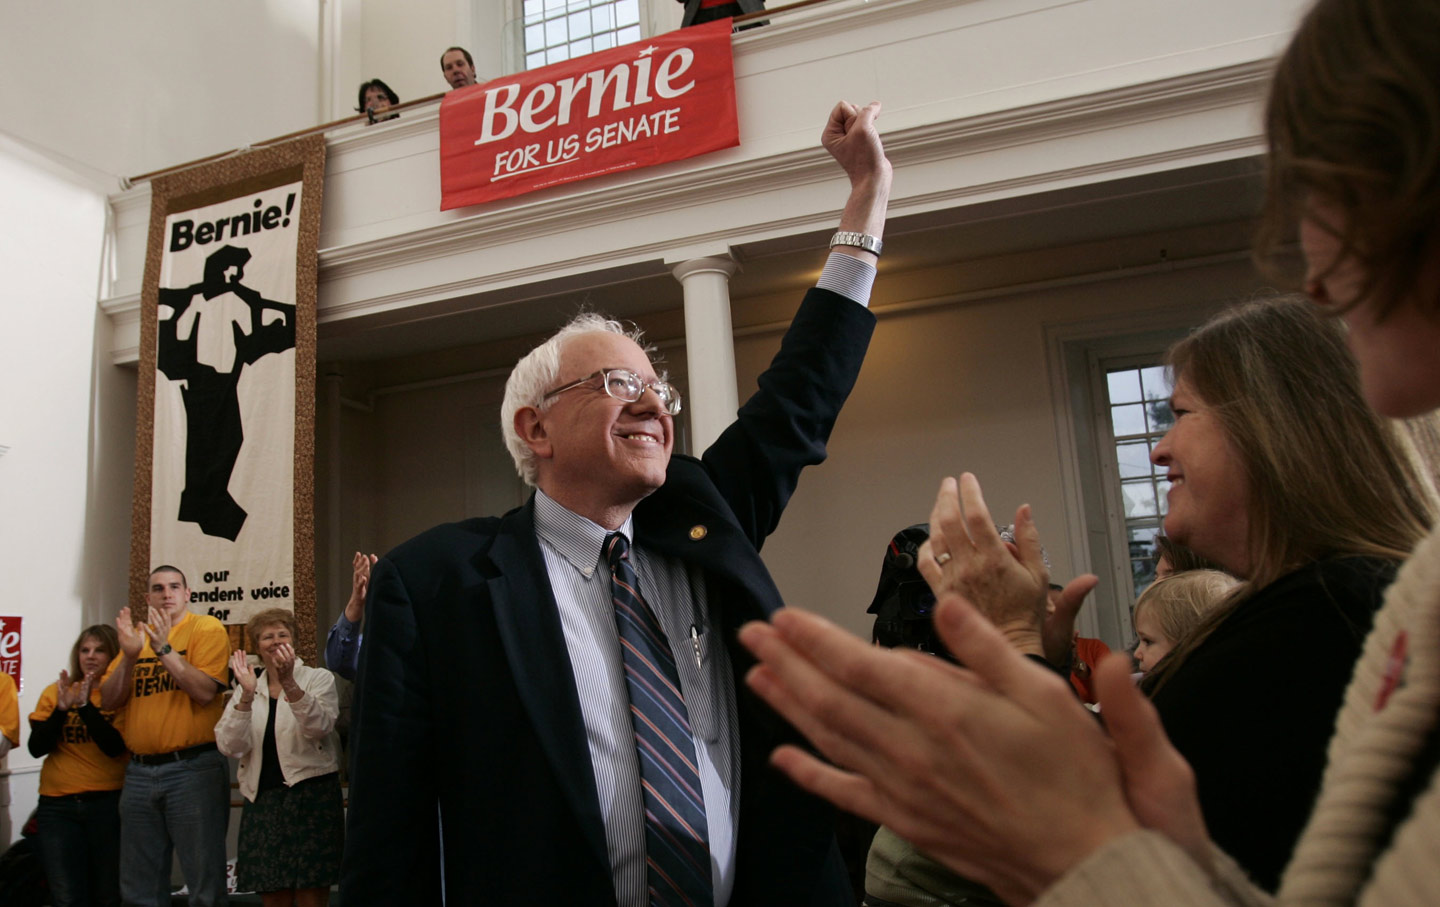 Bernie Sanders announces his candidacy for Senate in 2006.